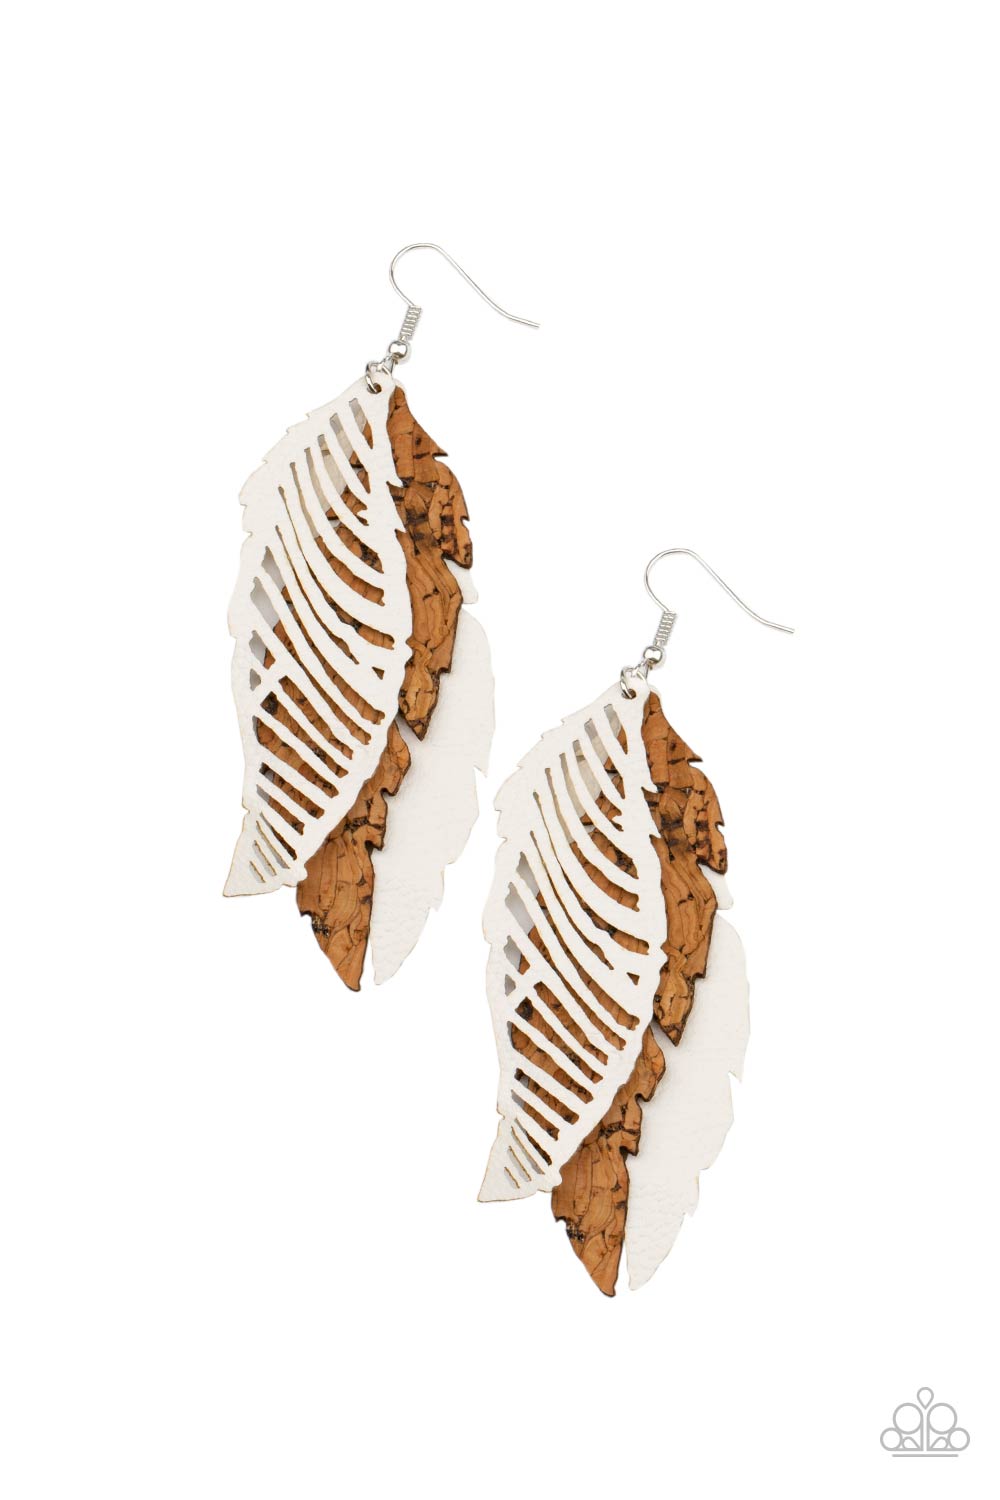 WINGING Off The Hook - White Leather & Brown Cork Earrings - Princess Glam Shop